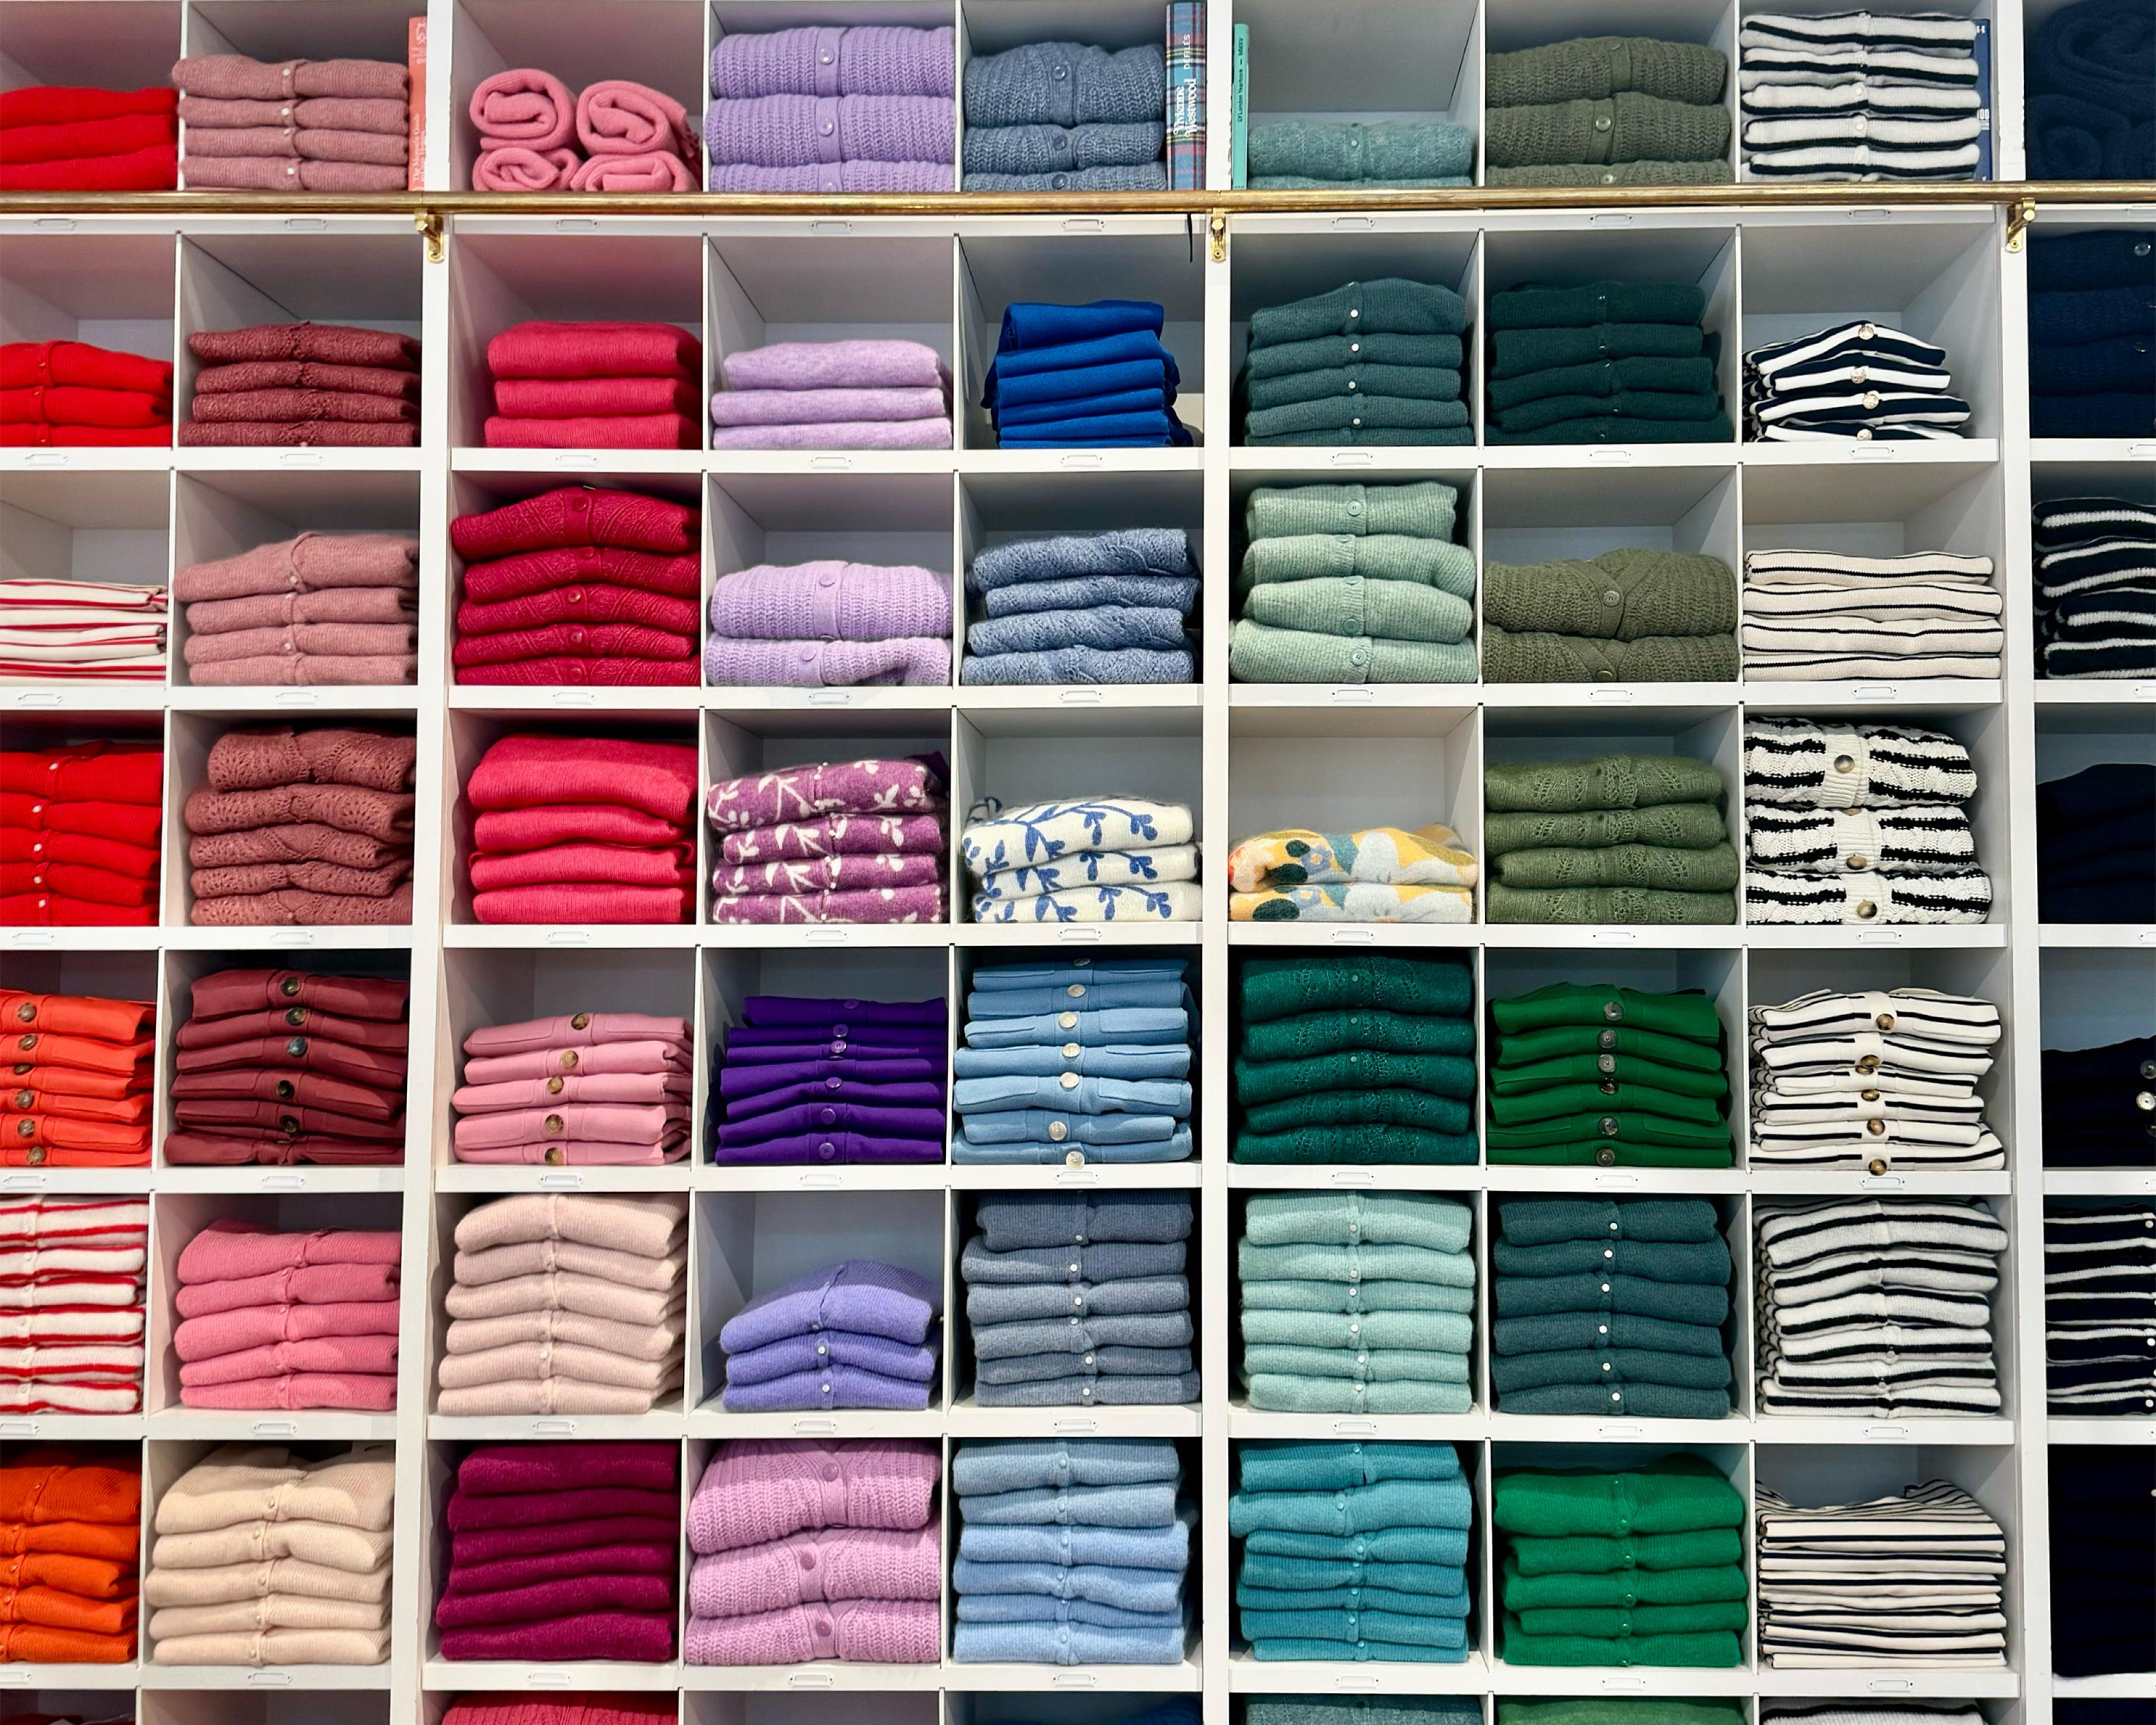 wall of shelves displaying sweaters in many colors folded and arranged vertically sorted by color